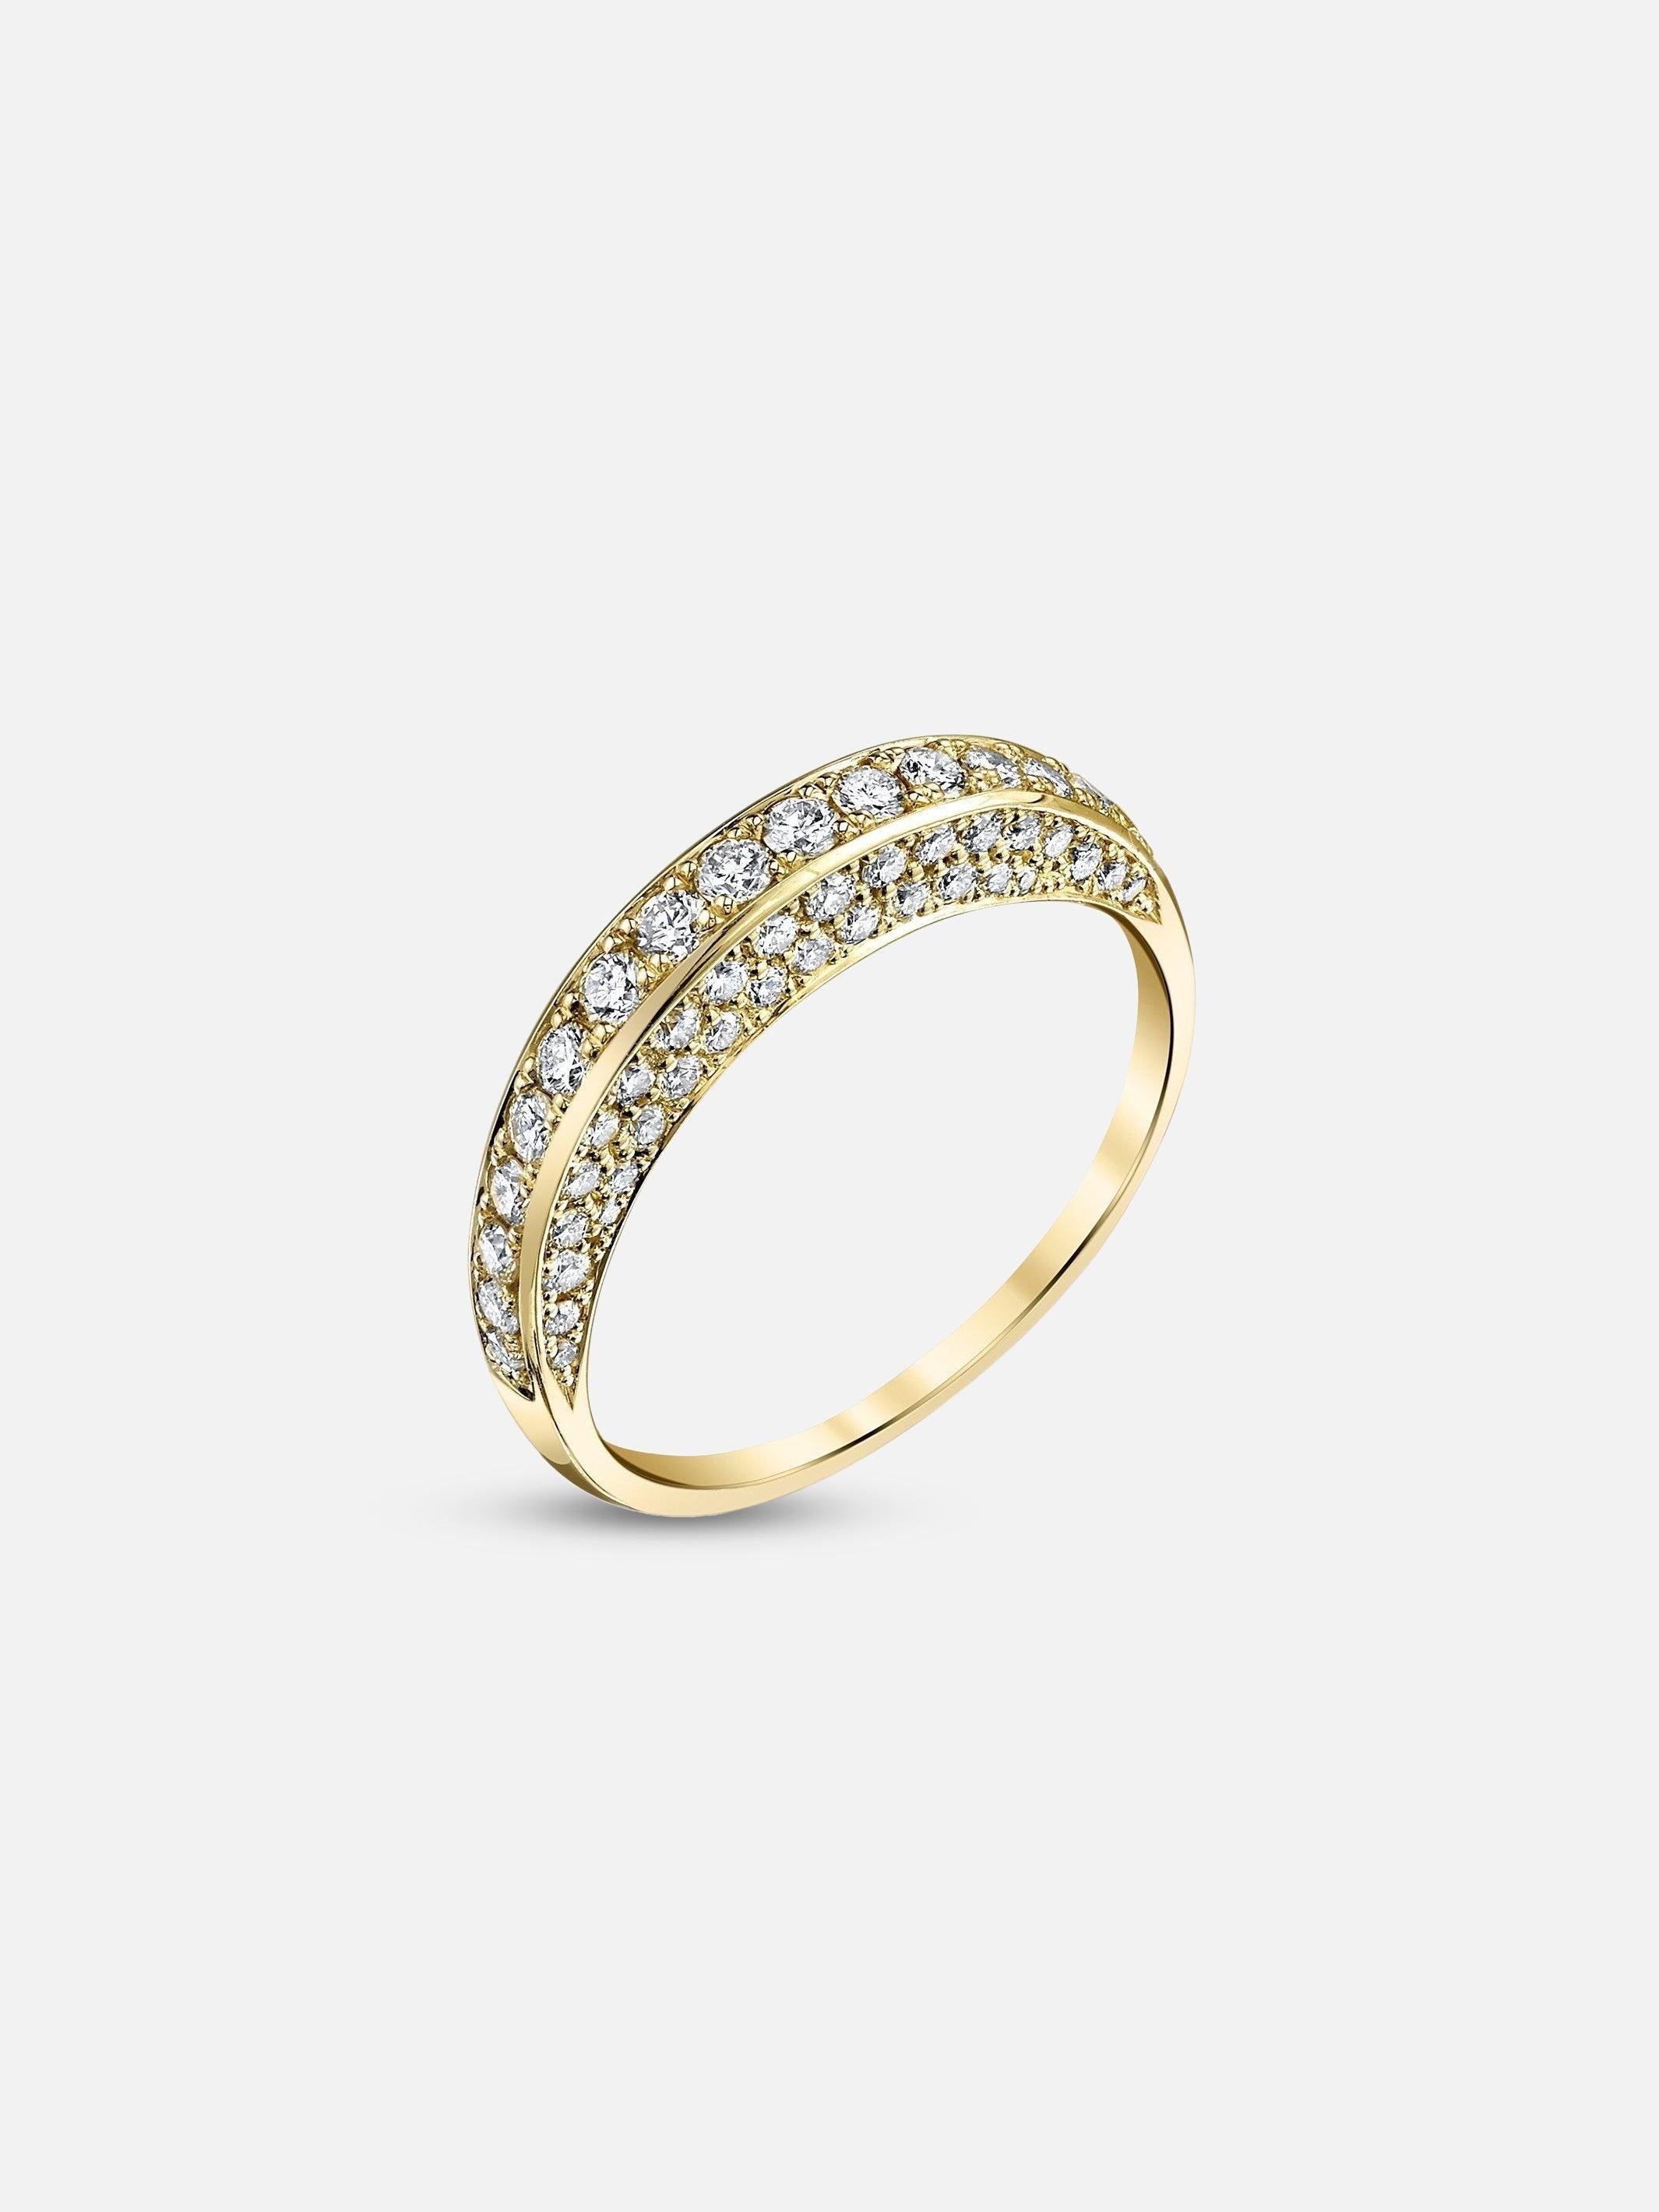 Arc Ring with Diamonds - Stacy Nolan - At Present